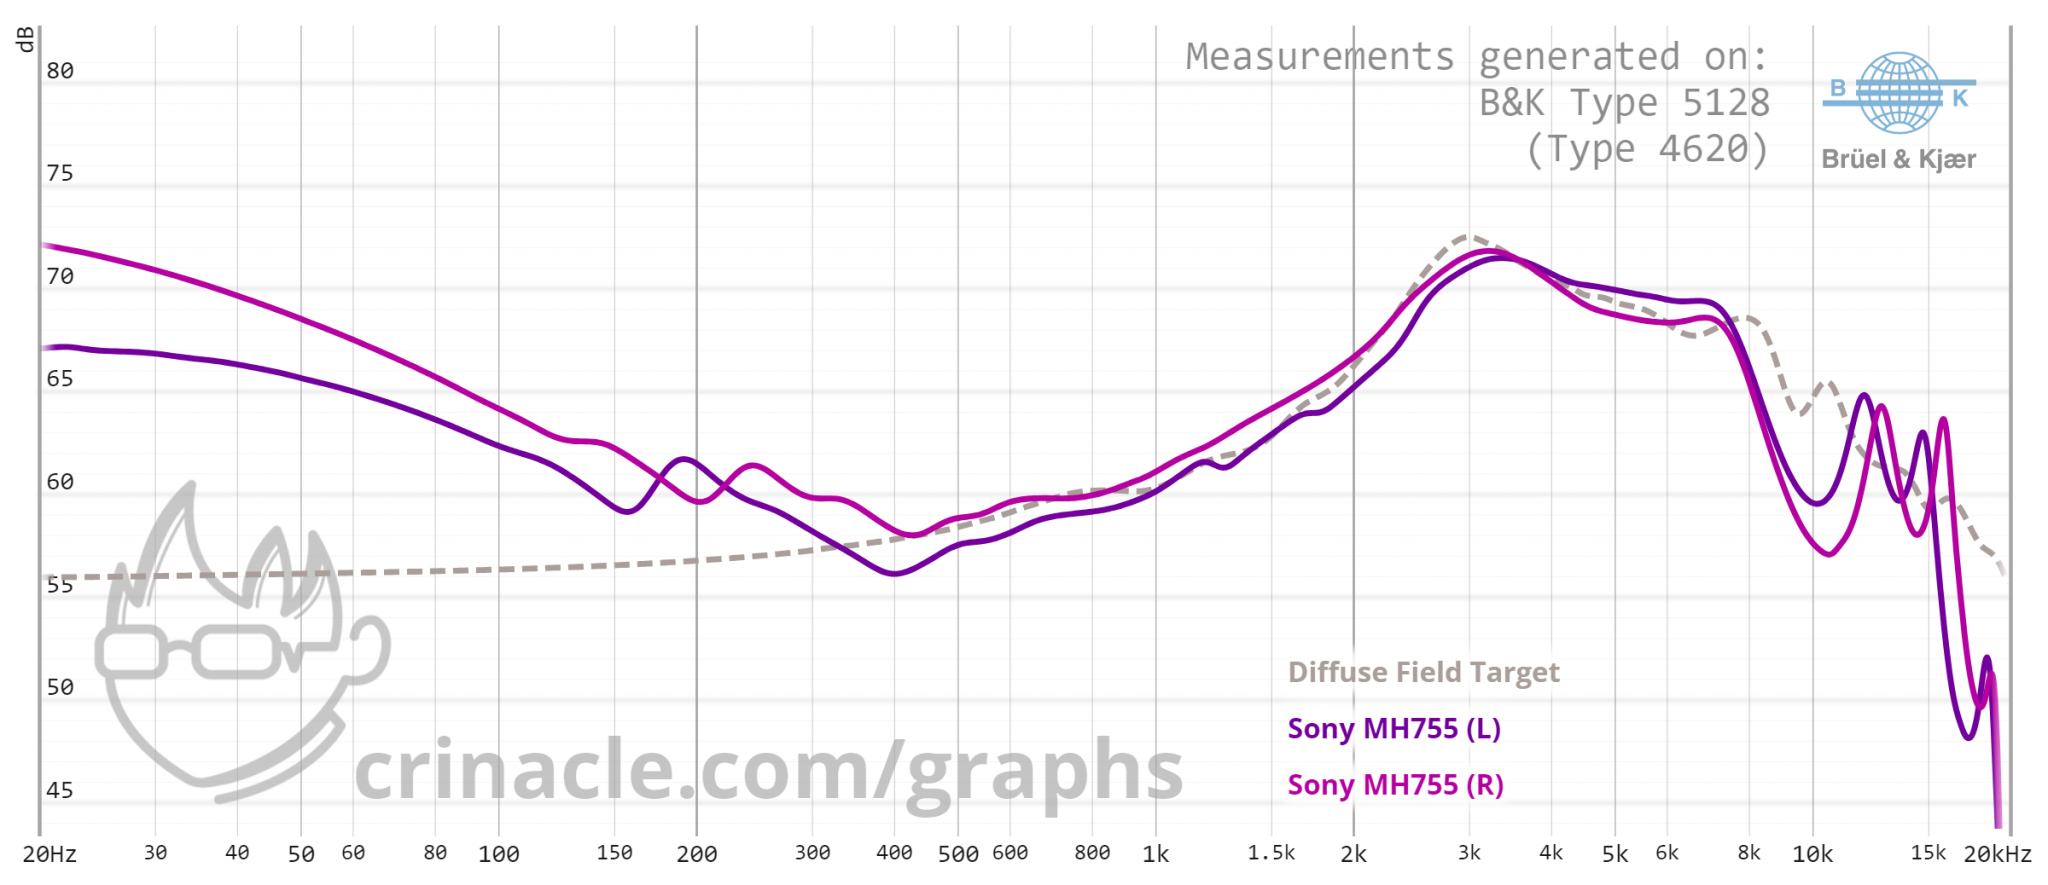 Sony MH755 on BK5128 uncomp.png